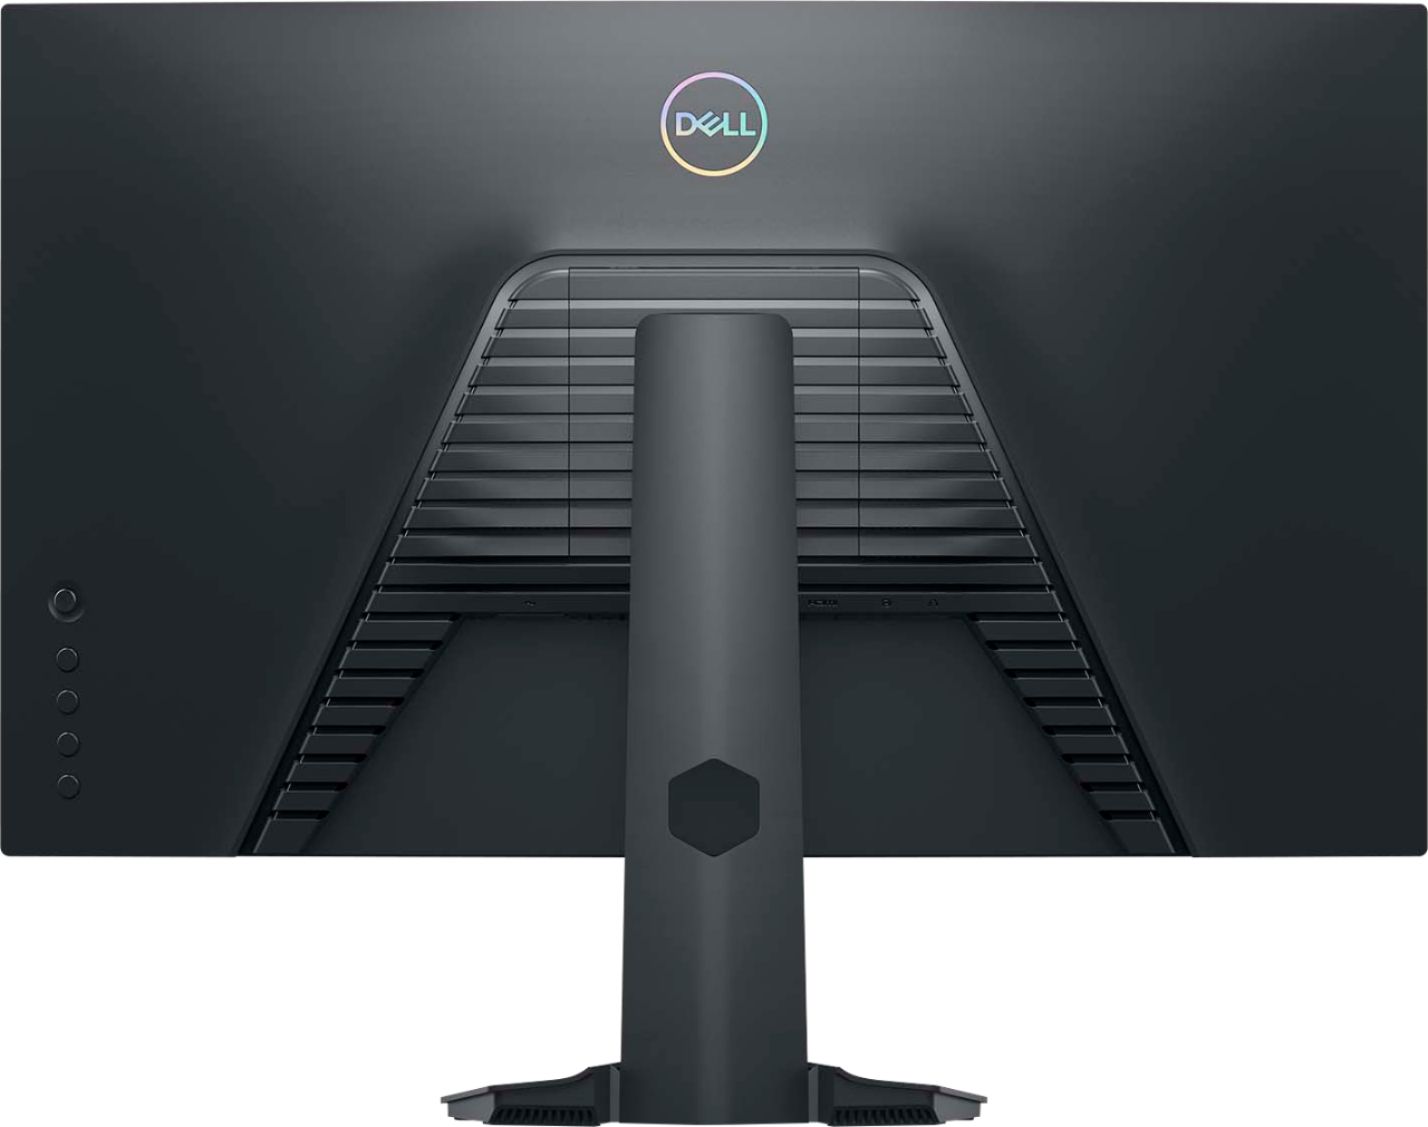 Back View: Dell - Geek Squad Certified Refurbished 27" LED Curved FHD FreeSync and G-SYNC Compatible Monitor - Black